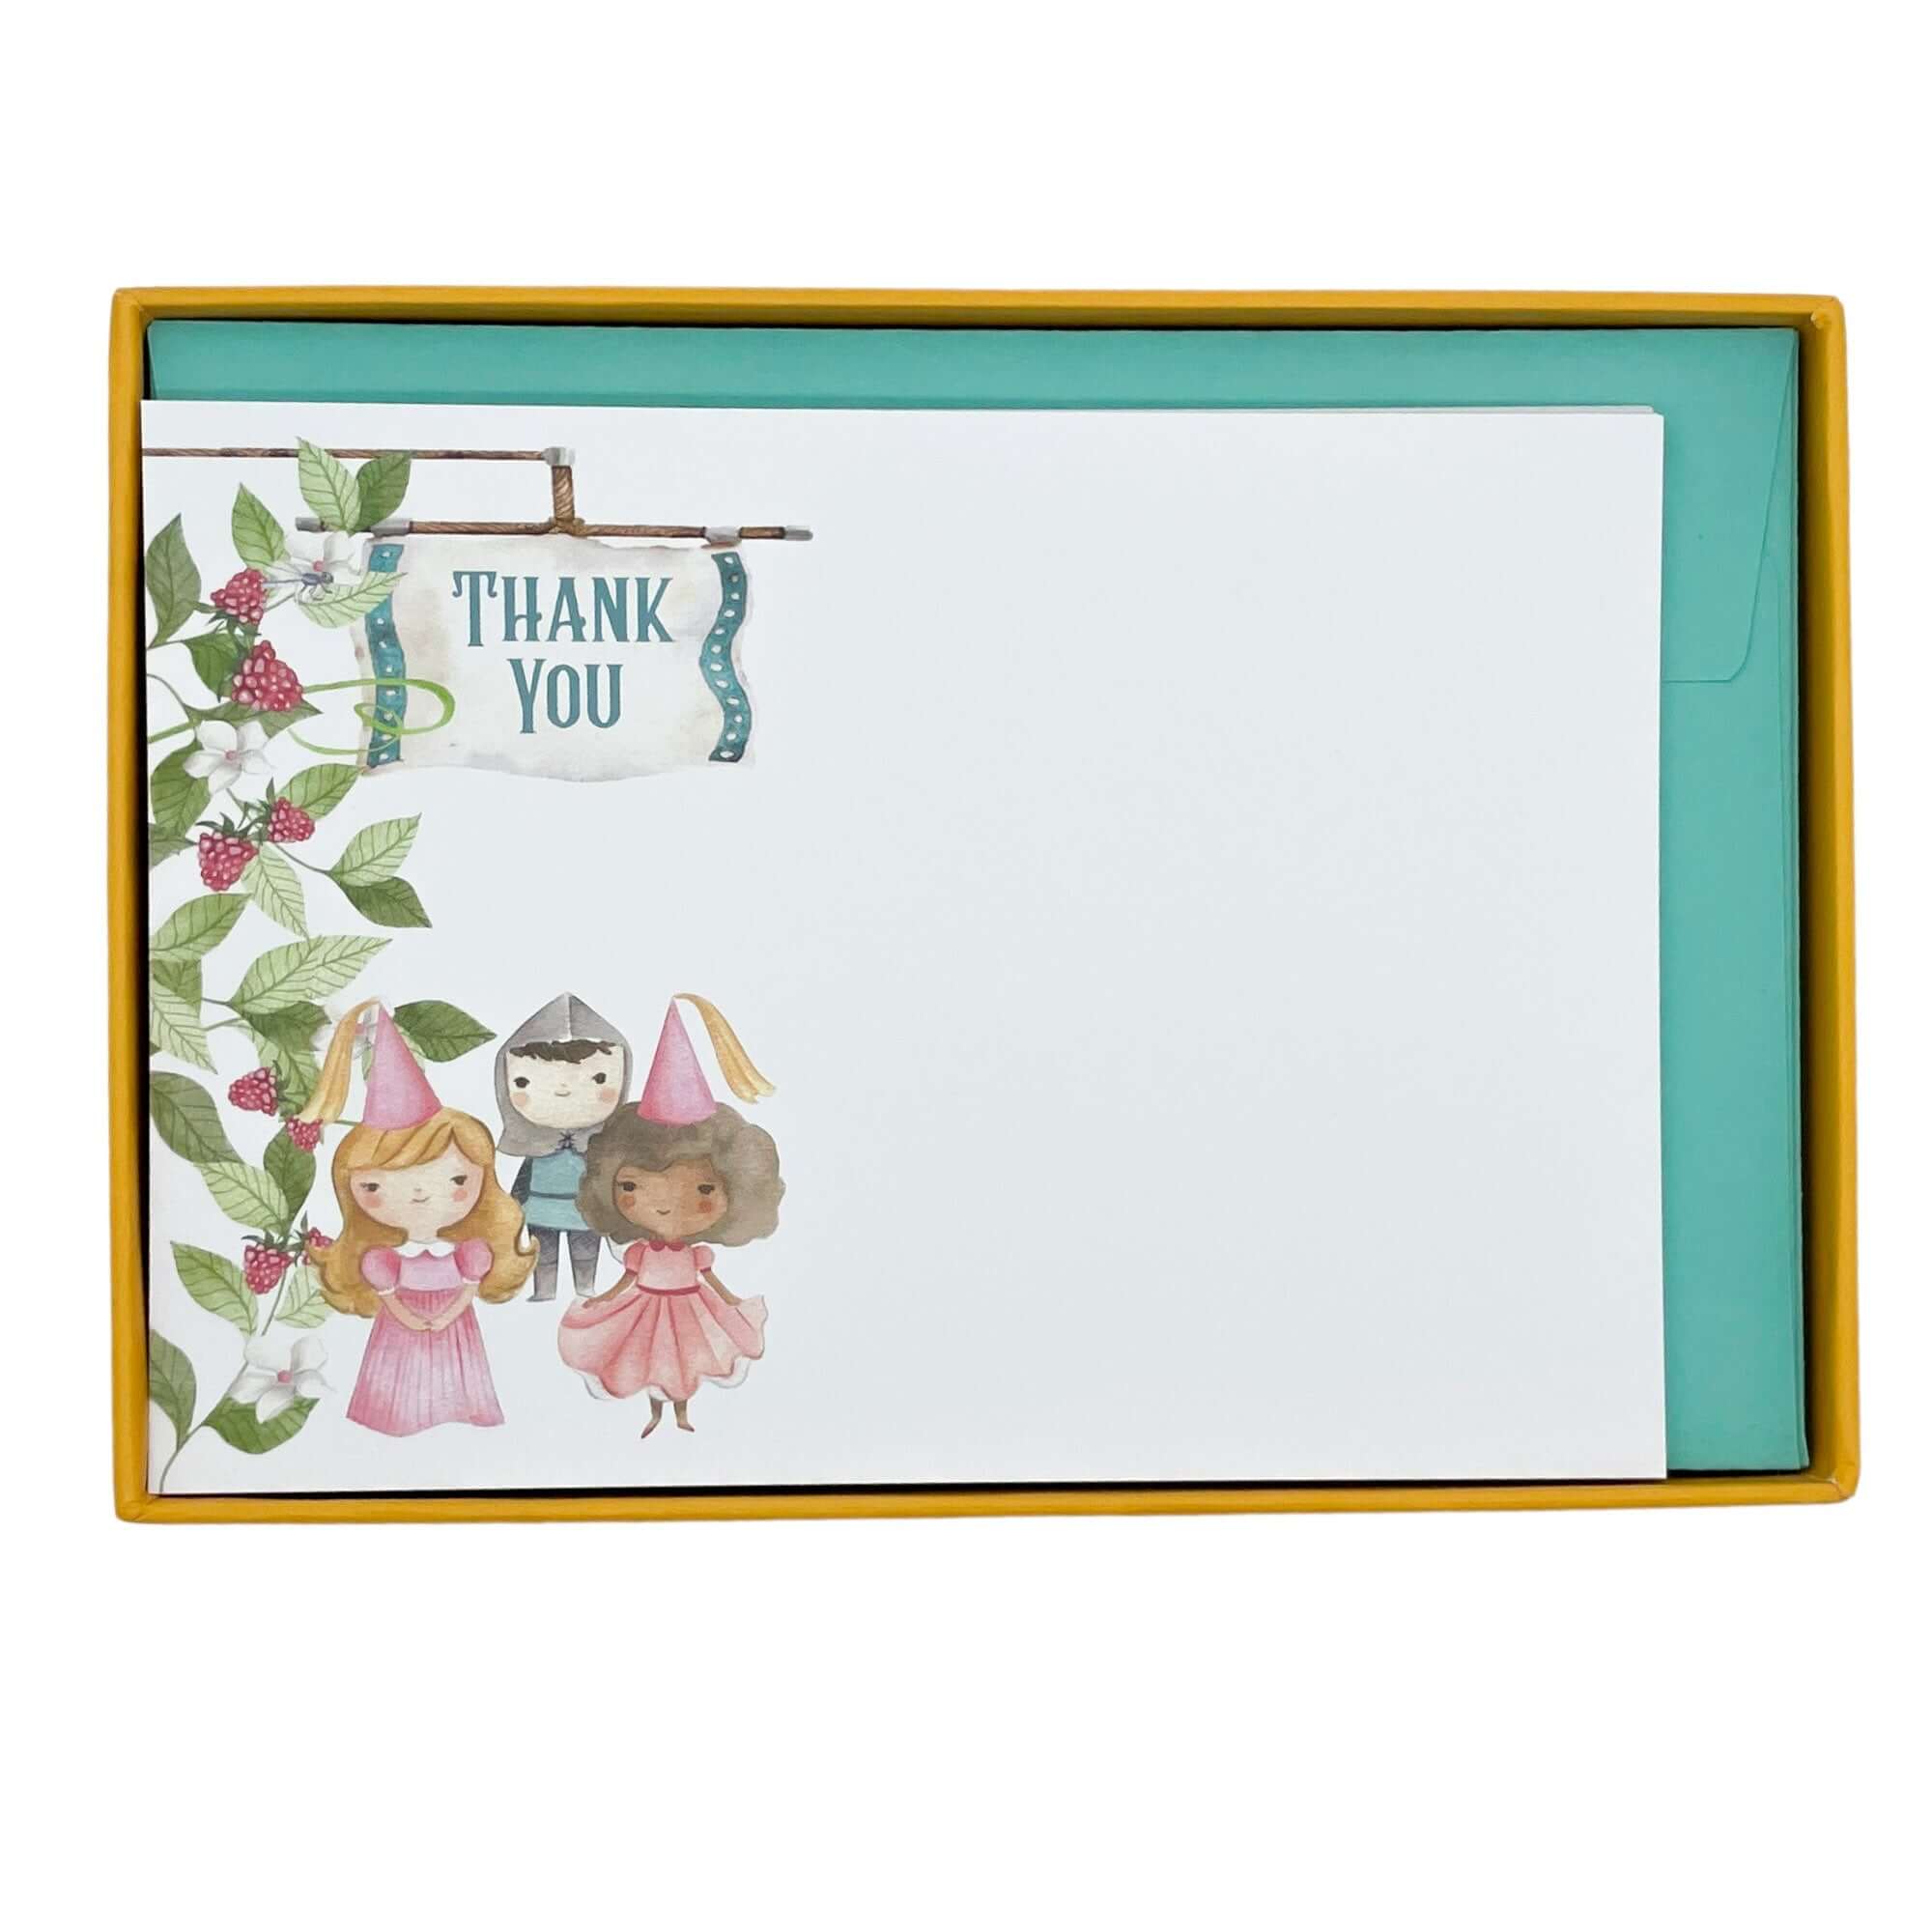 Once Upon A Time "Princess" Thank You Notecard Set Children's Notecards Mustard and Gray Ltd Shropshire UK